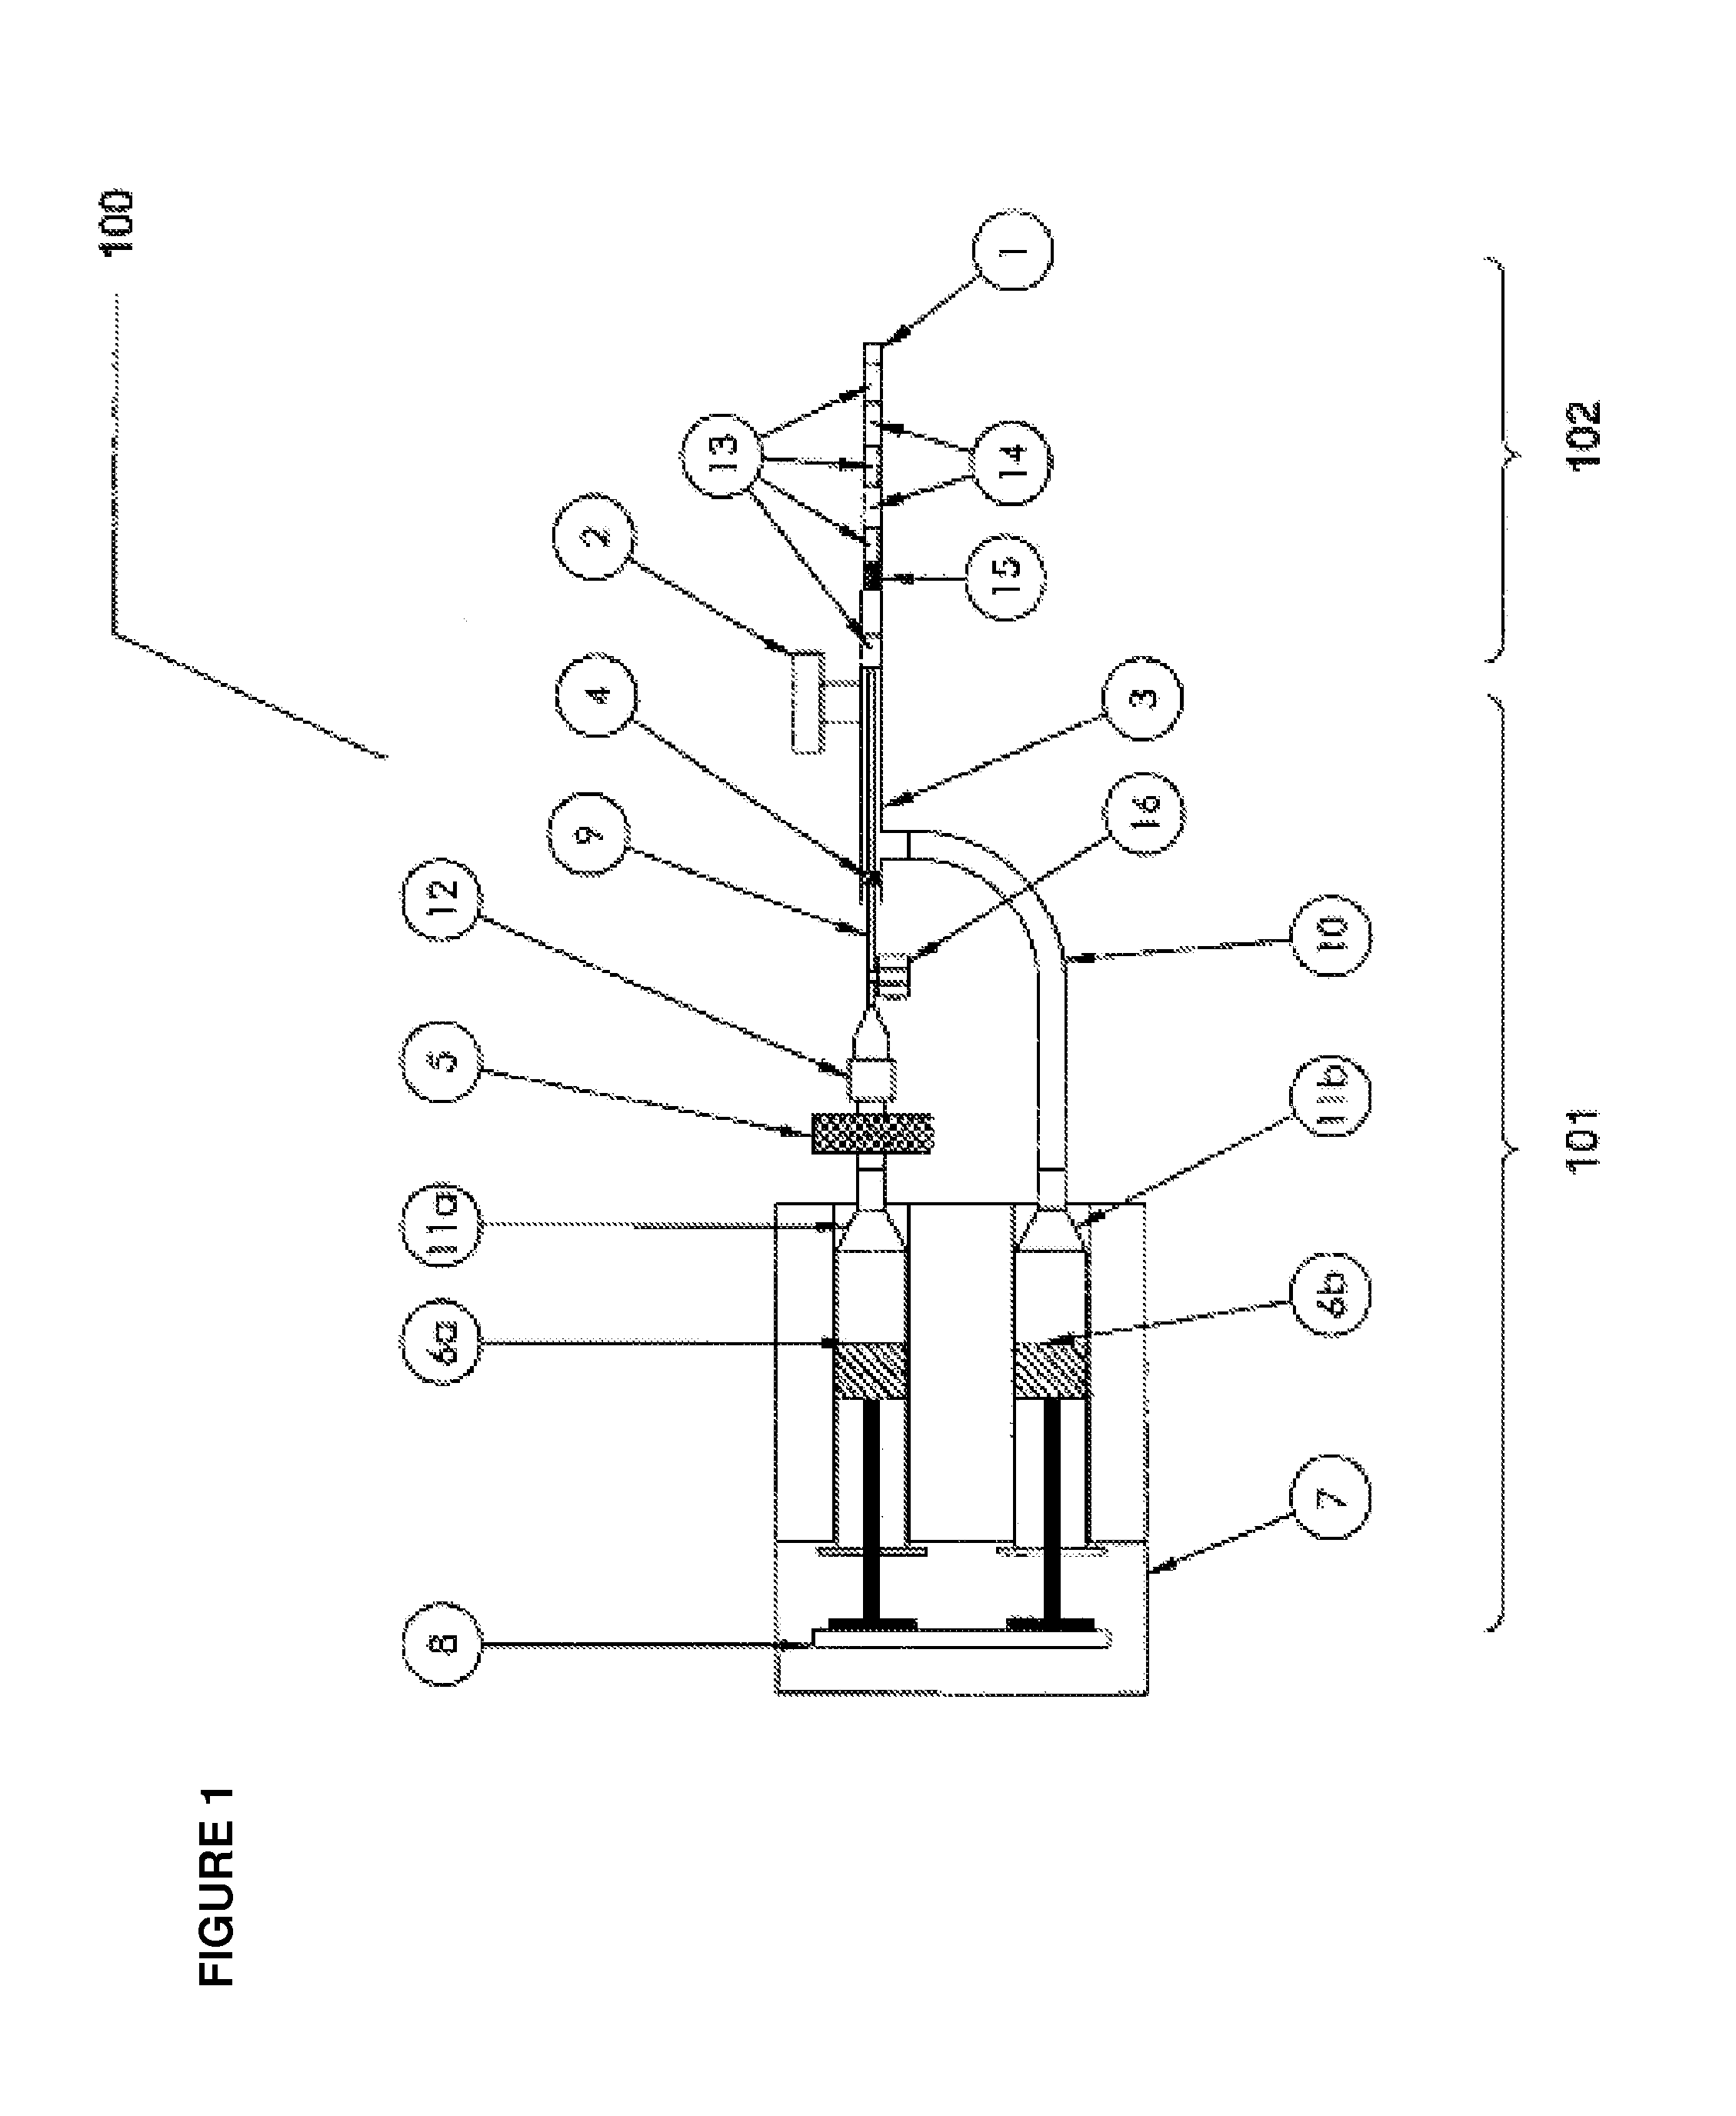 Method and Devices for Sonographic Imaging